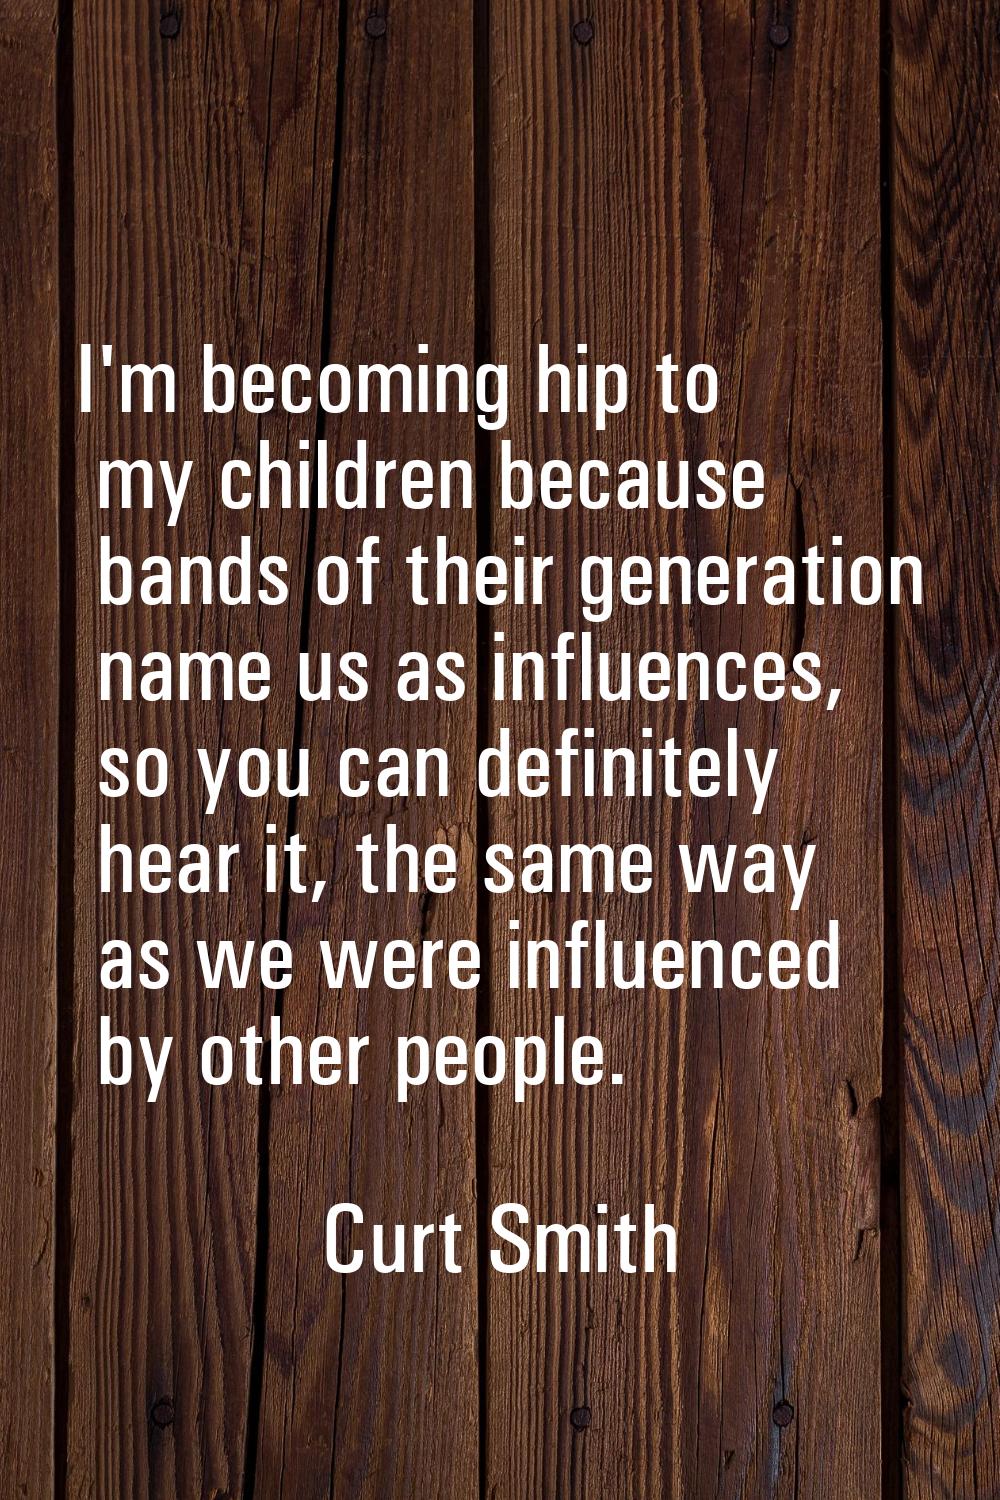 I'm becoming hip to my children because bands of their generation name us as influences, so you can